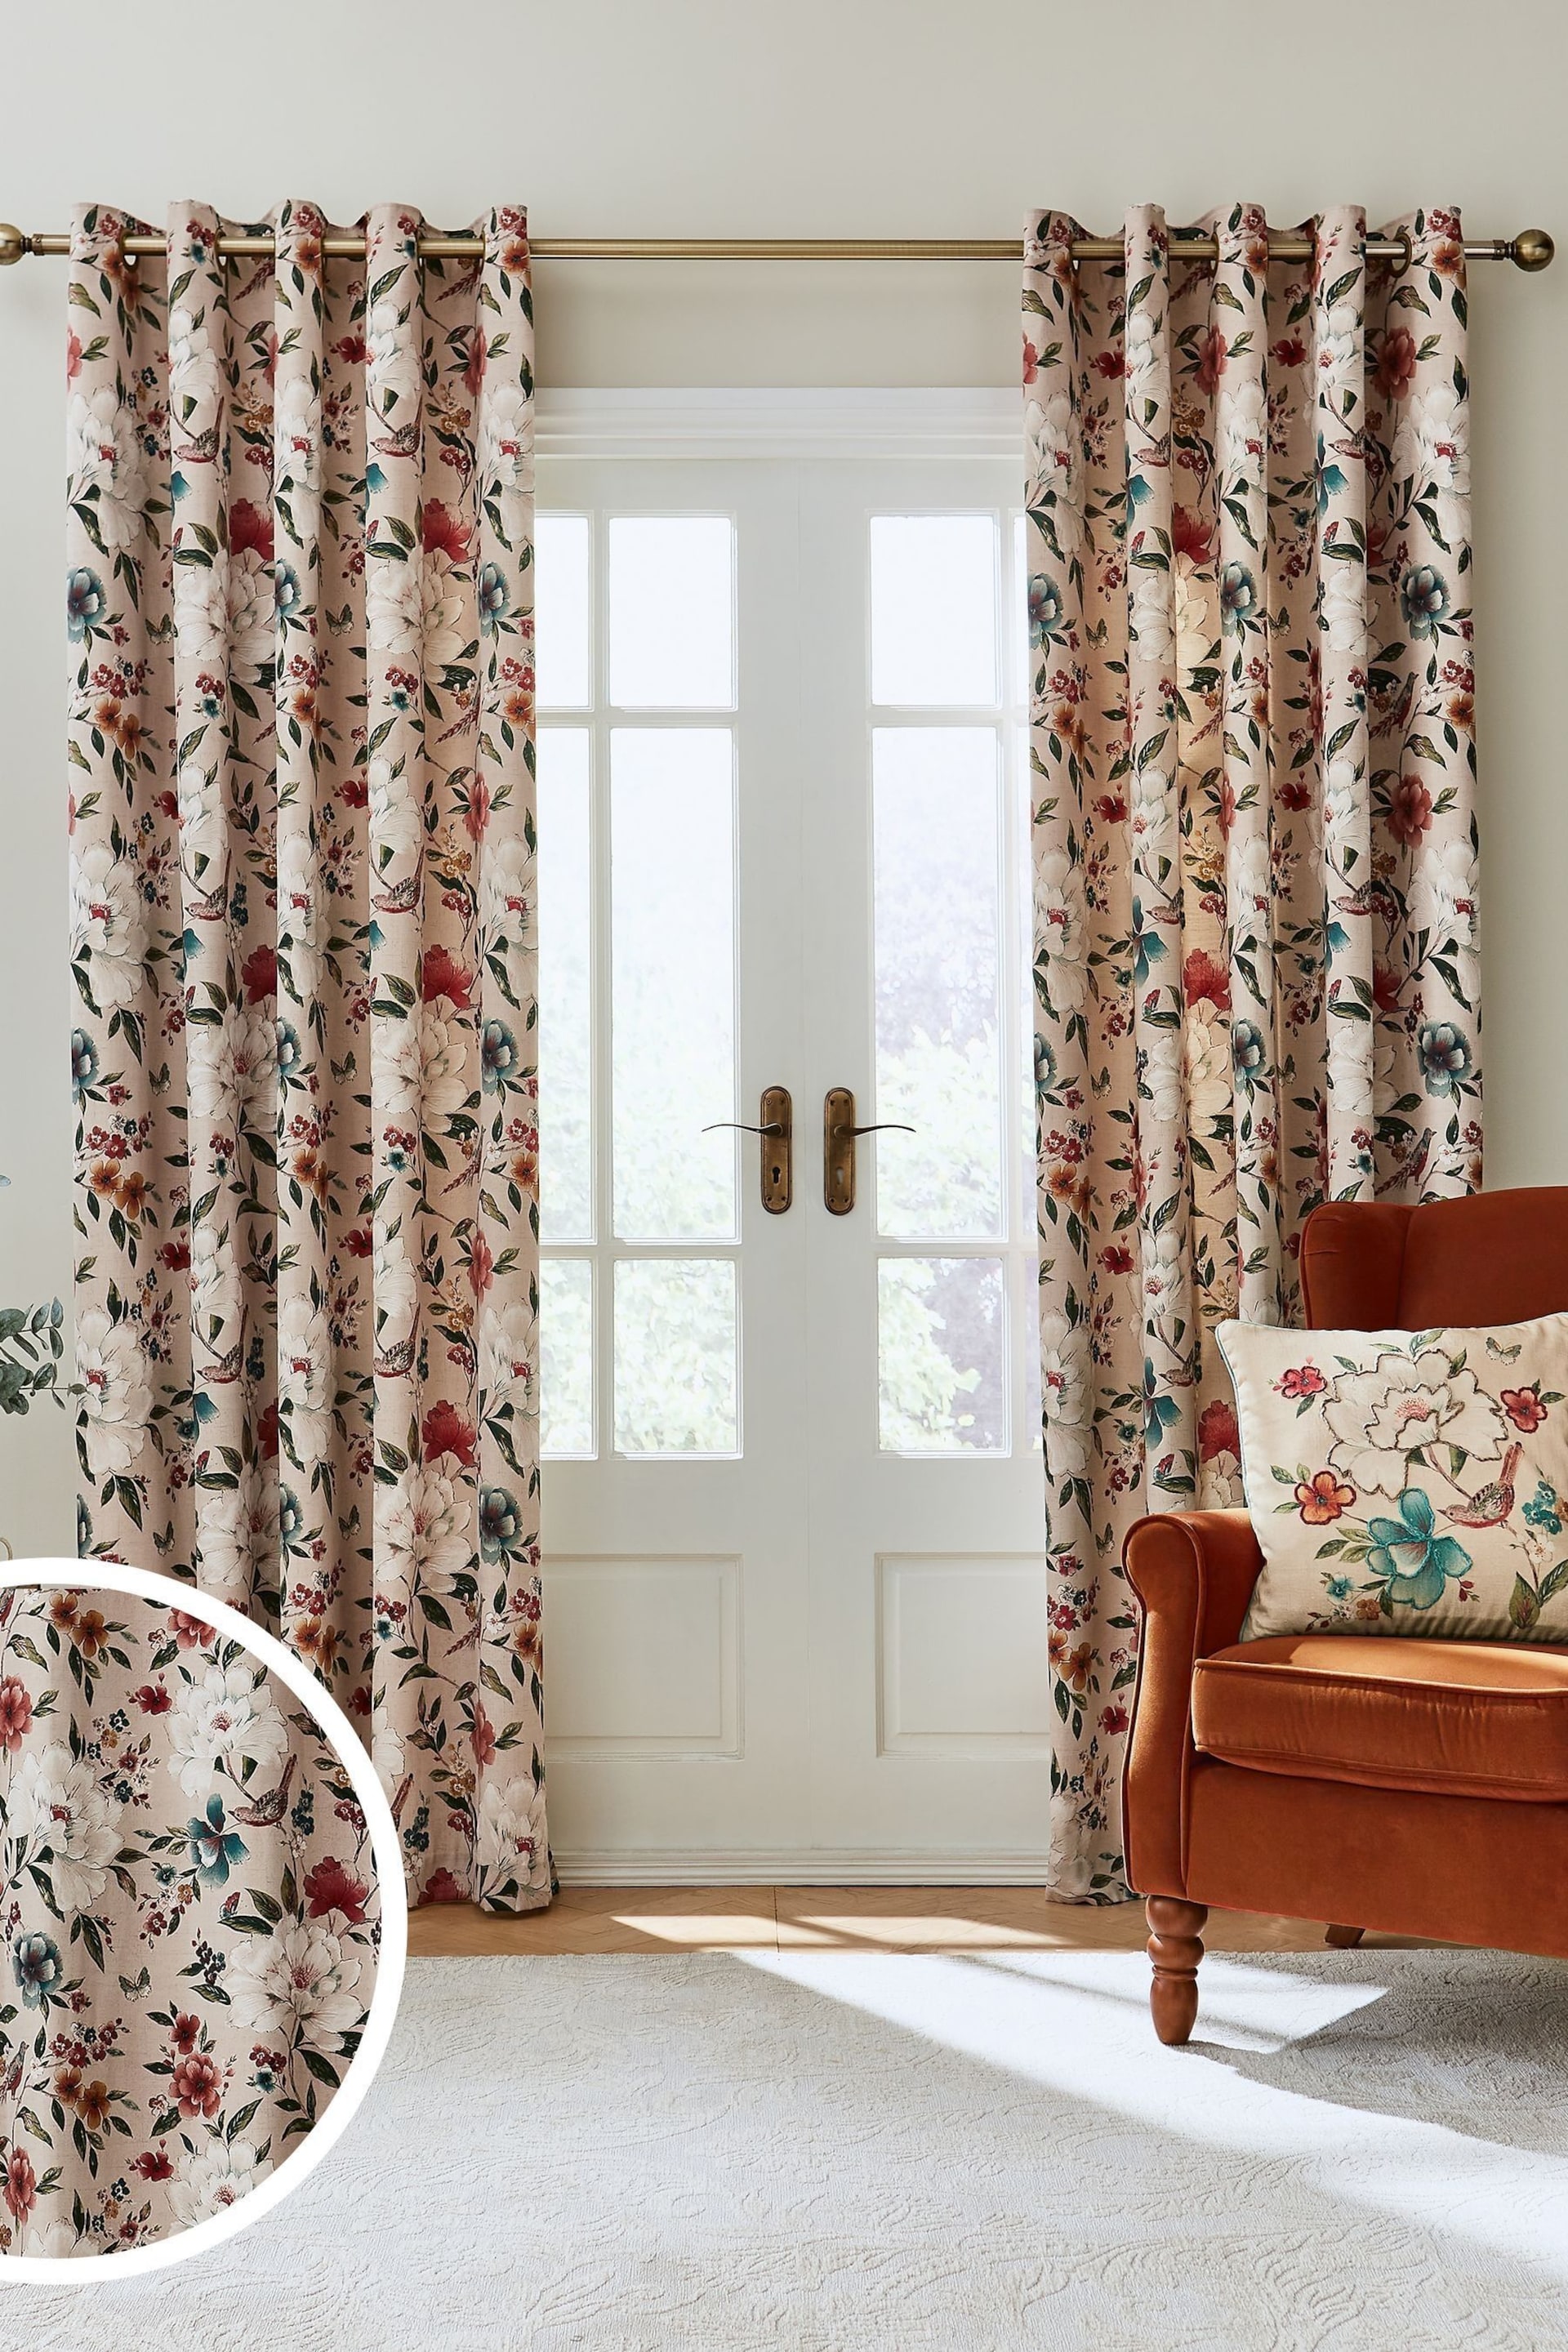 Catherine Lansfield Natural Pippa Floral Birds Lined Eyelet Curtains - Image 1 of 4